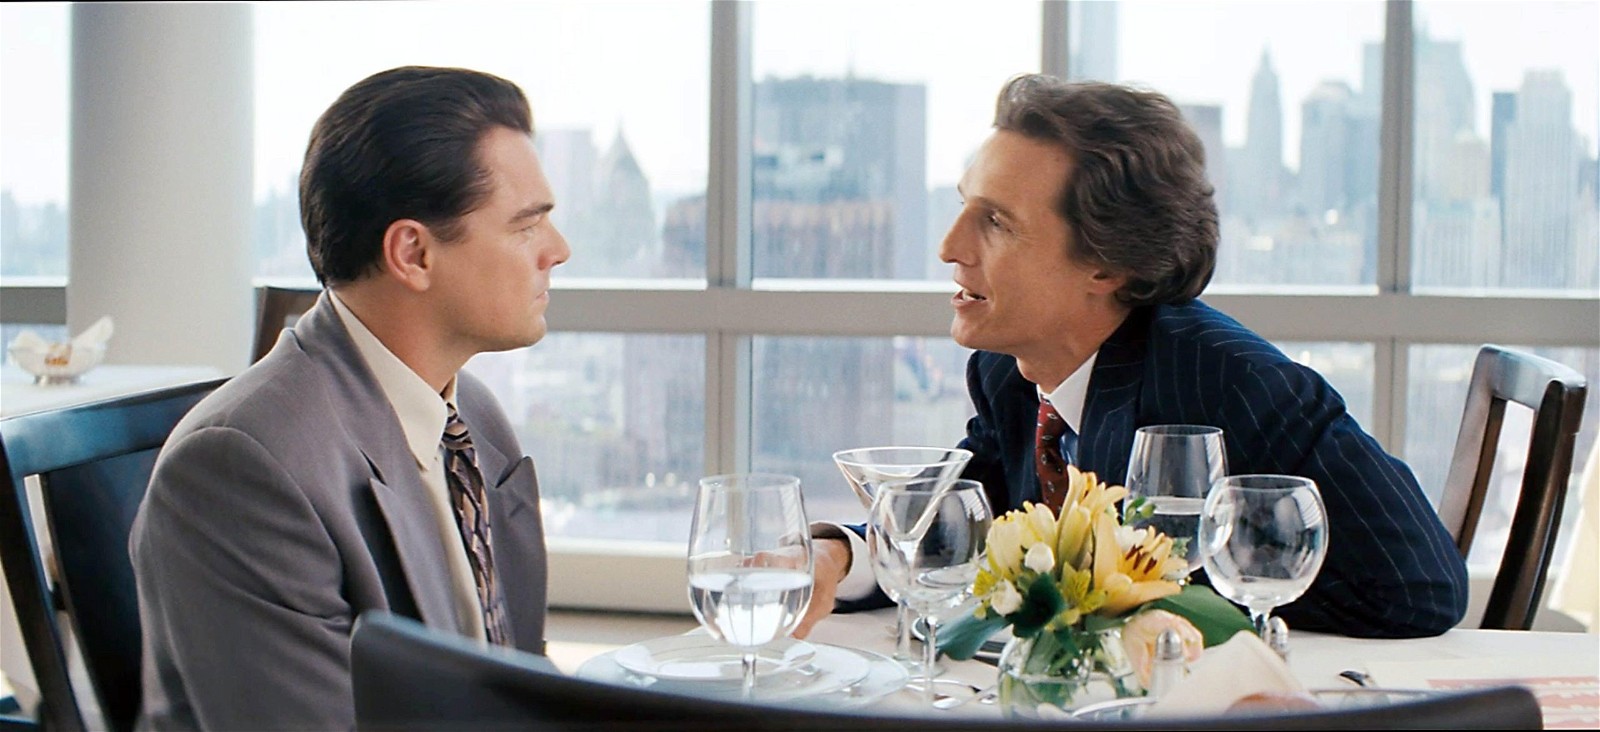 Leonardo DiCaprio and Matthew McConaughey in The Wolf of Wall Street.